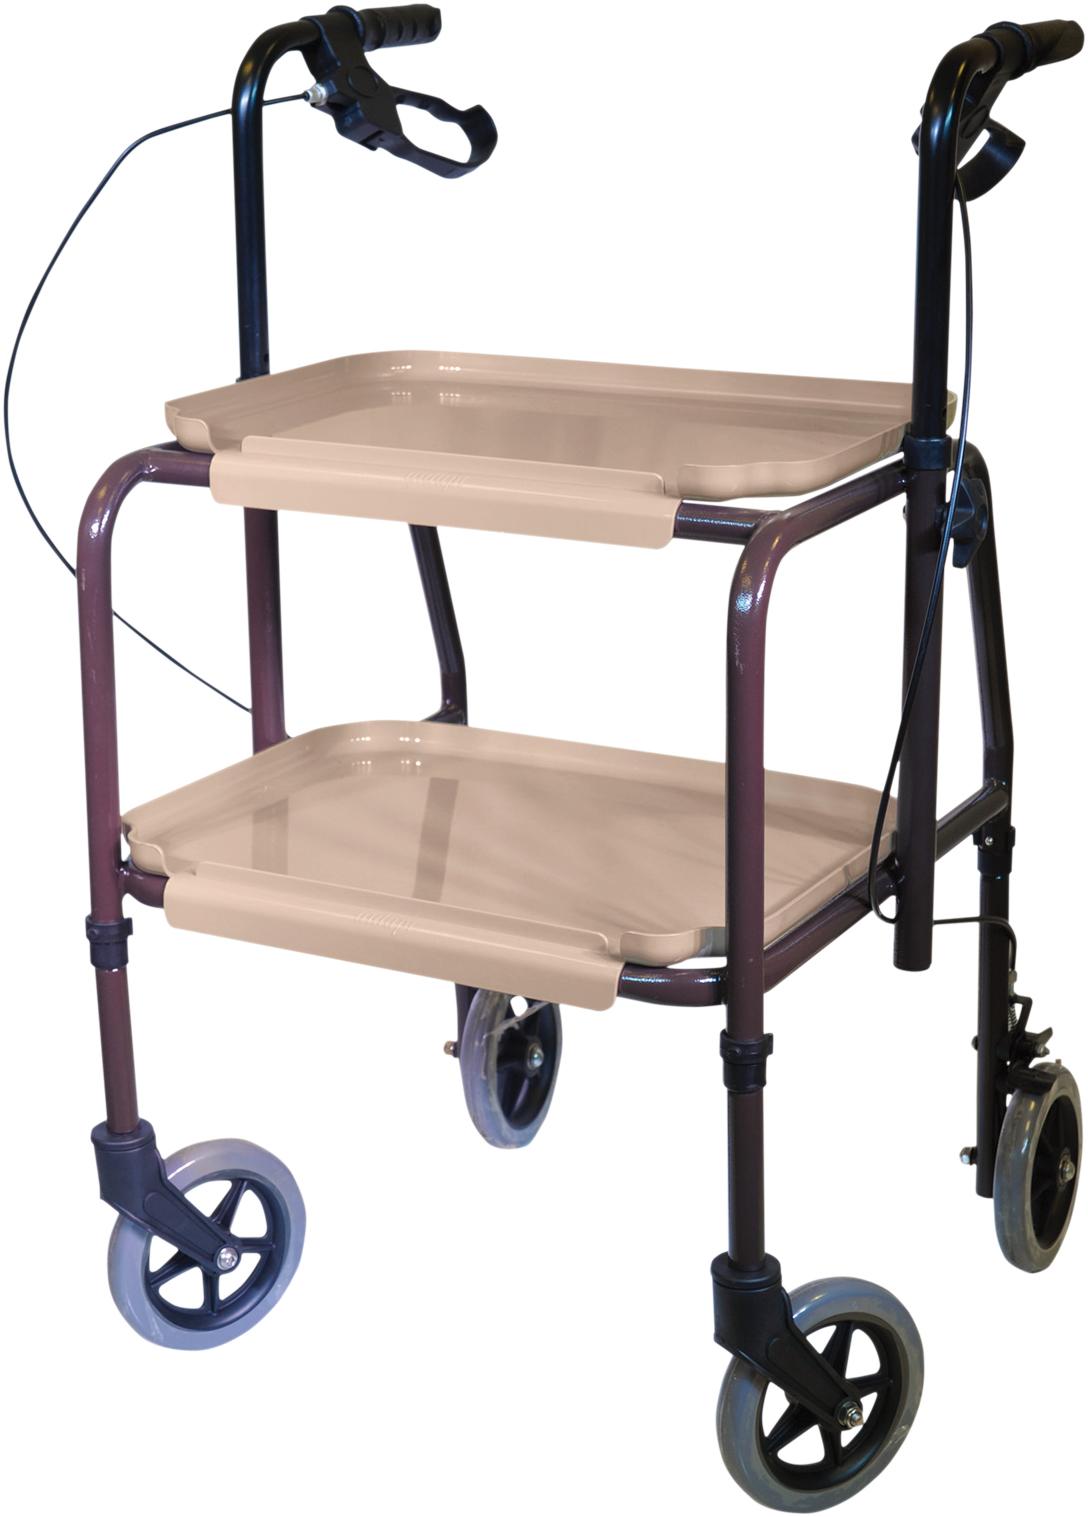 Tea Kitchen Trollet for Disabled or Elderly person walking aid in kitchen